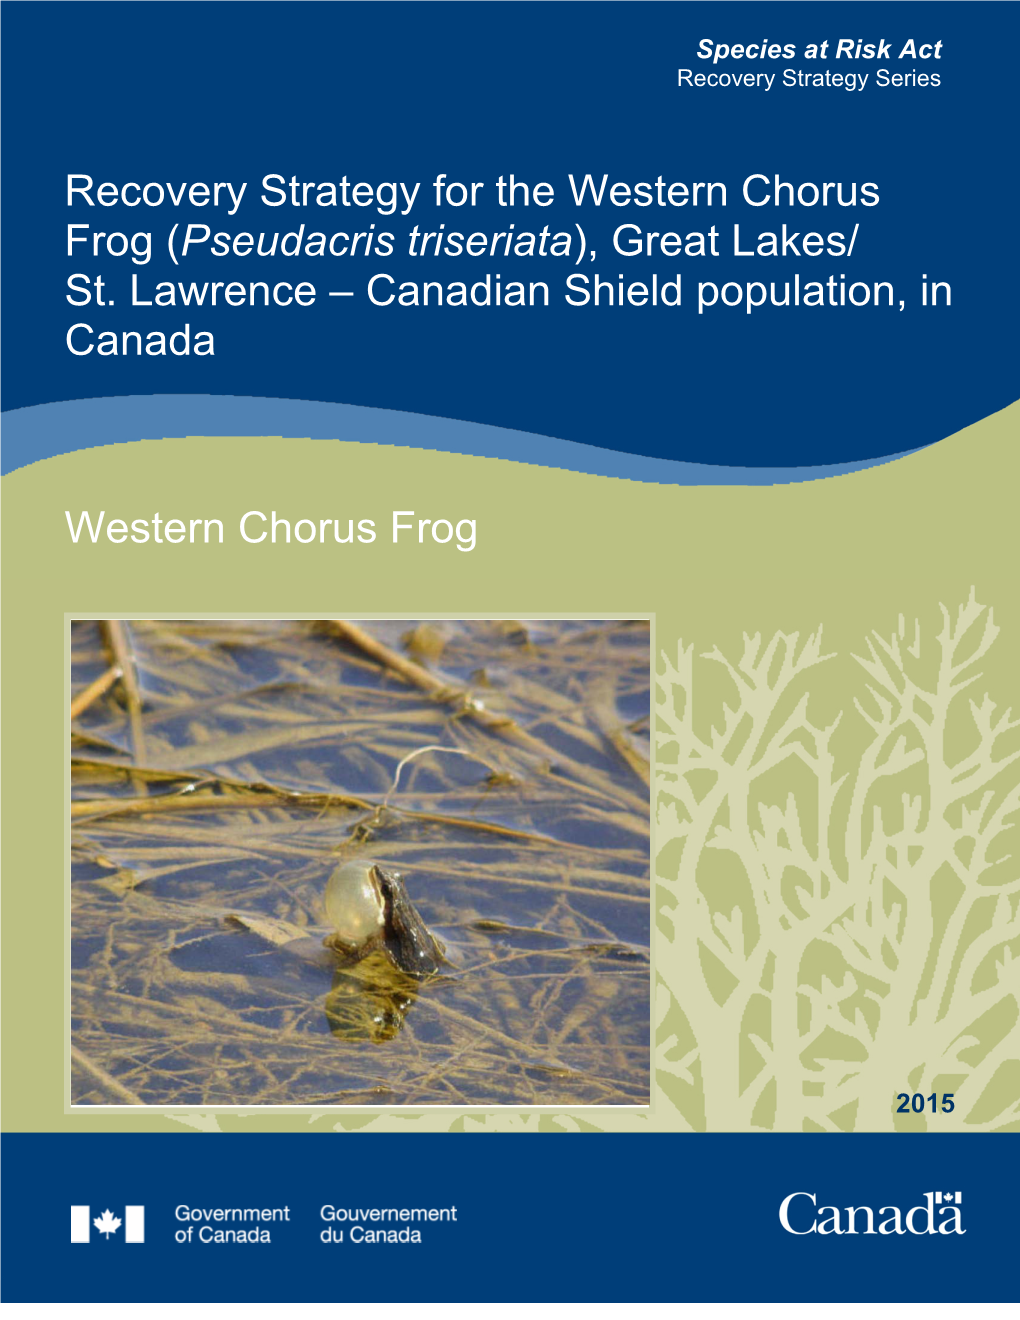 Recovery Strategy for the Western Chorus Frog (Pseudacris Triseriata), Great Lakes/ St